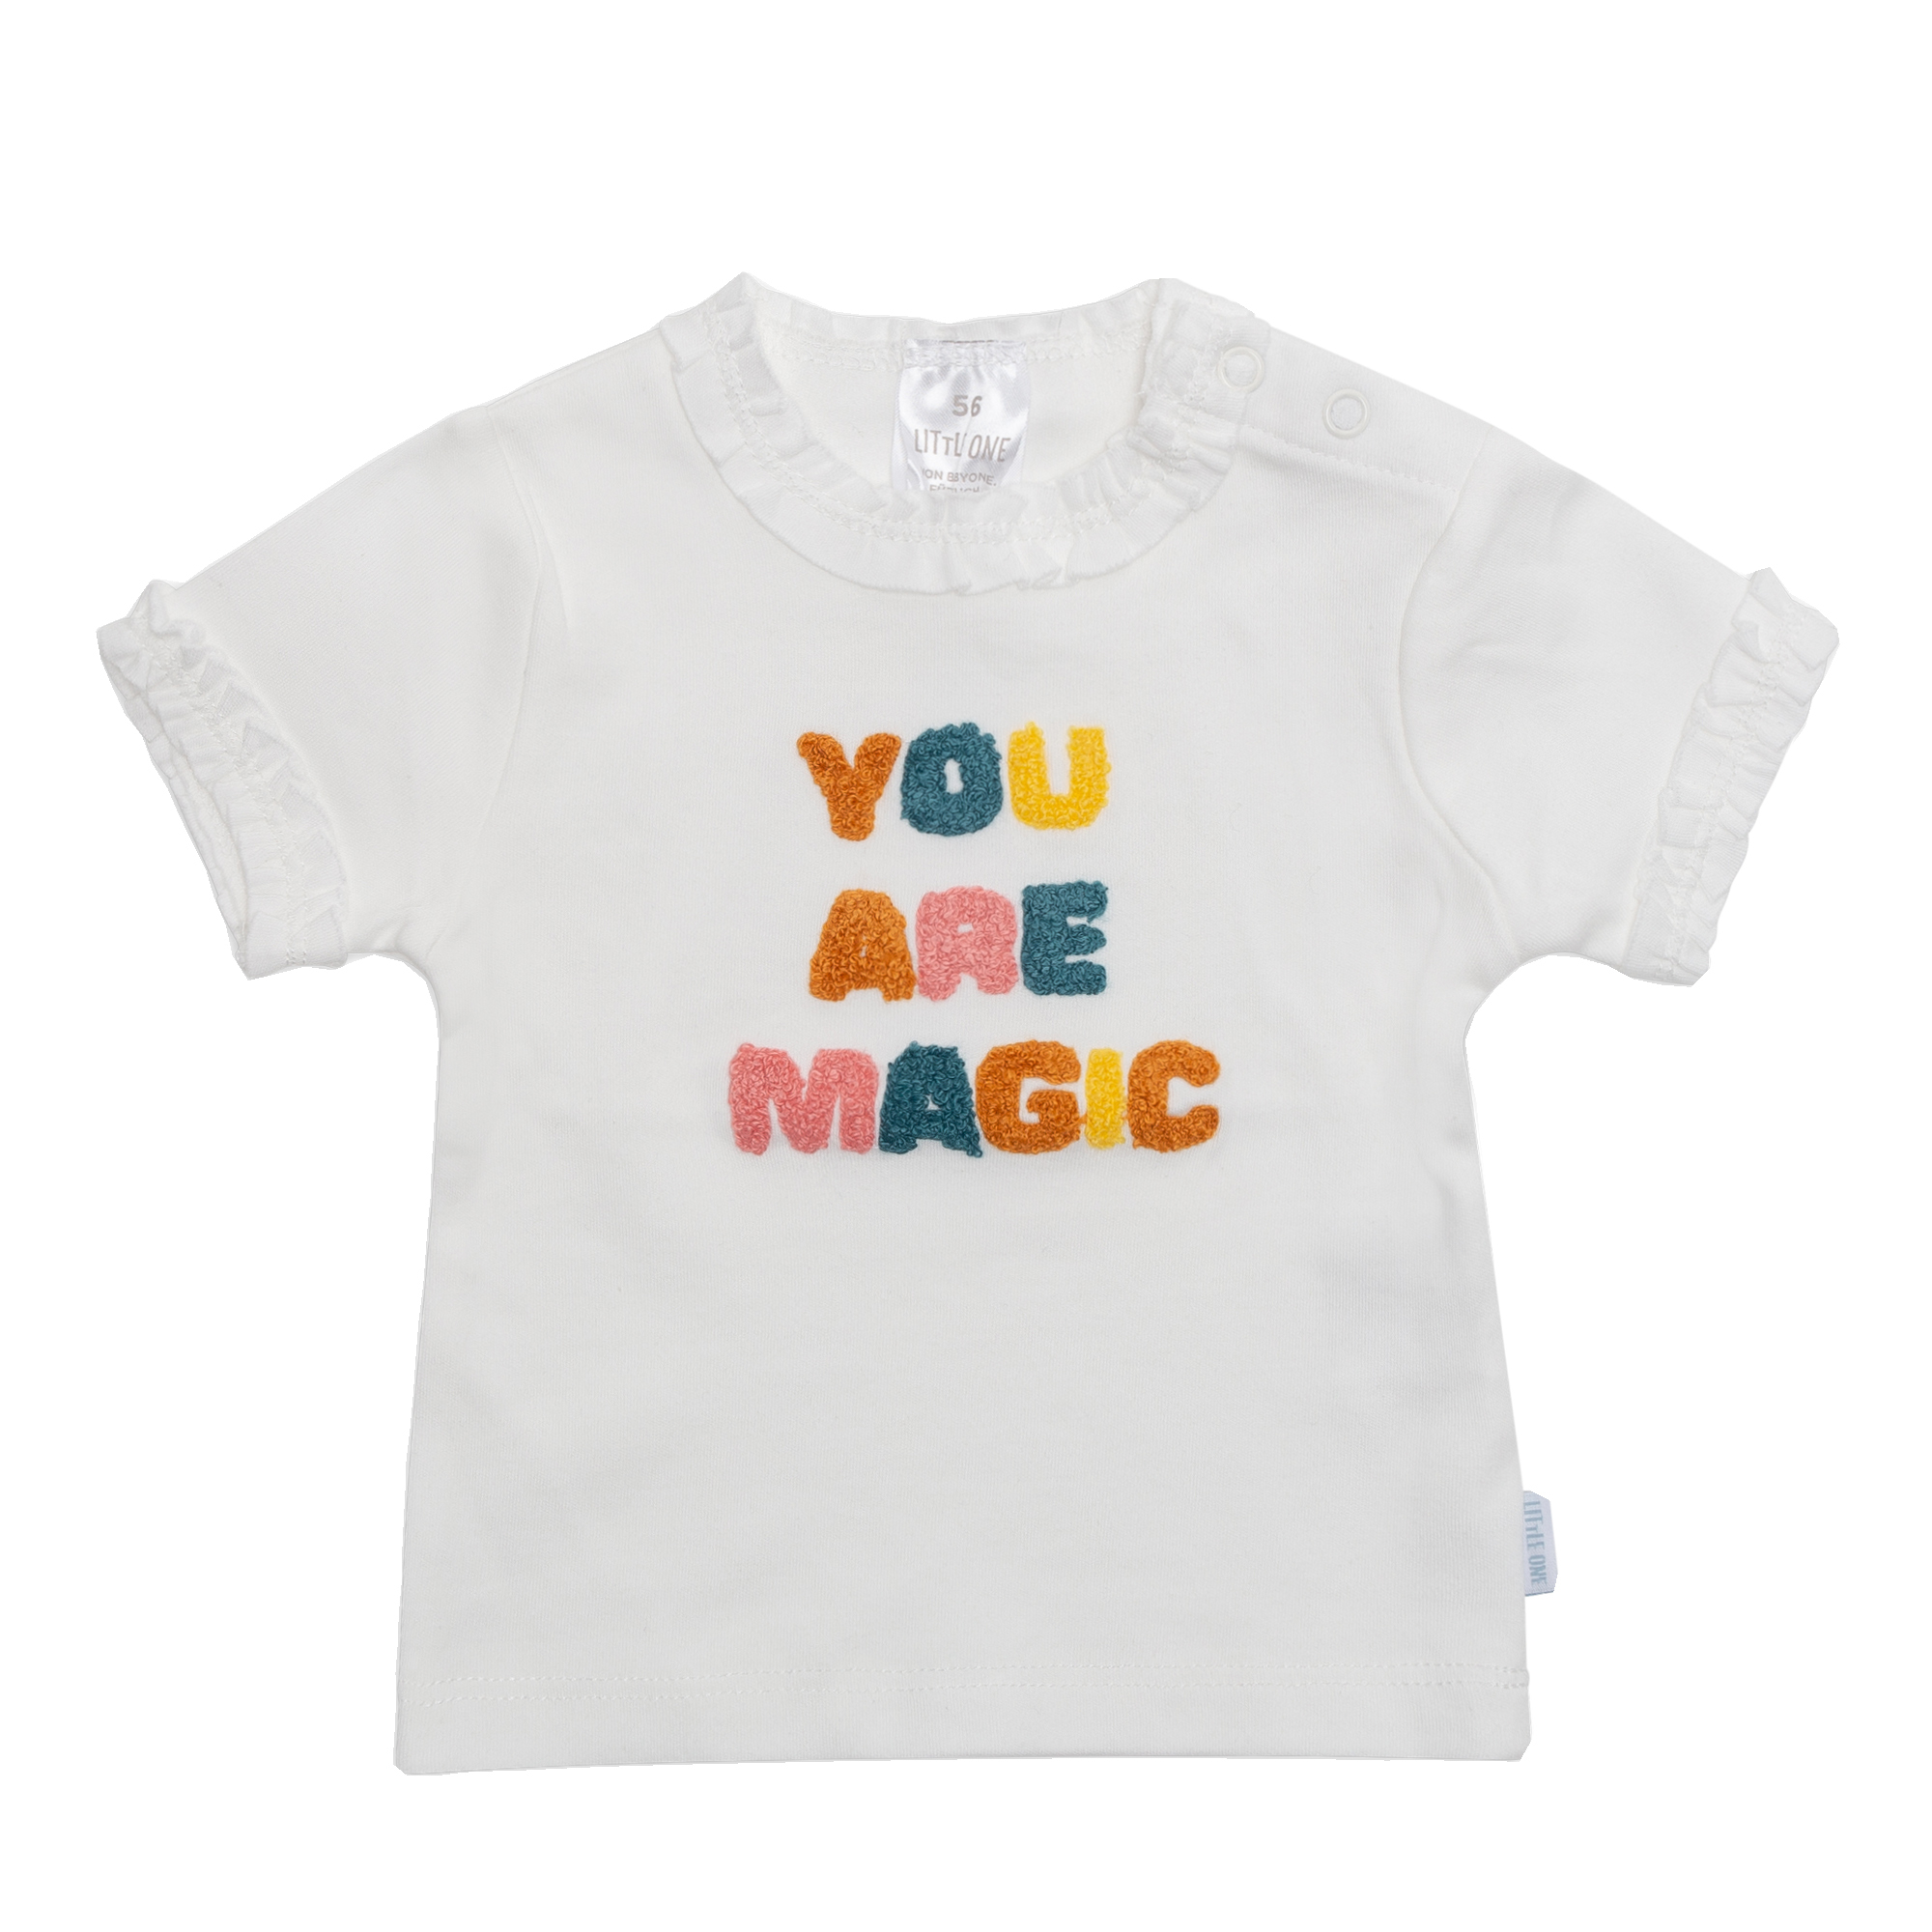 T-Shirt "You are magic" LITTLE ONE Weiß M2000584258703 1